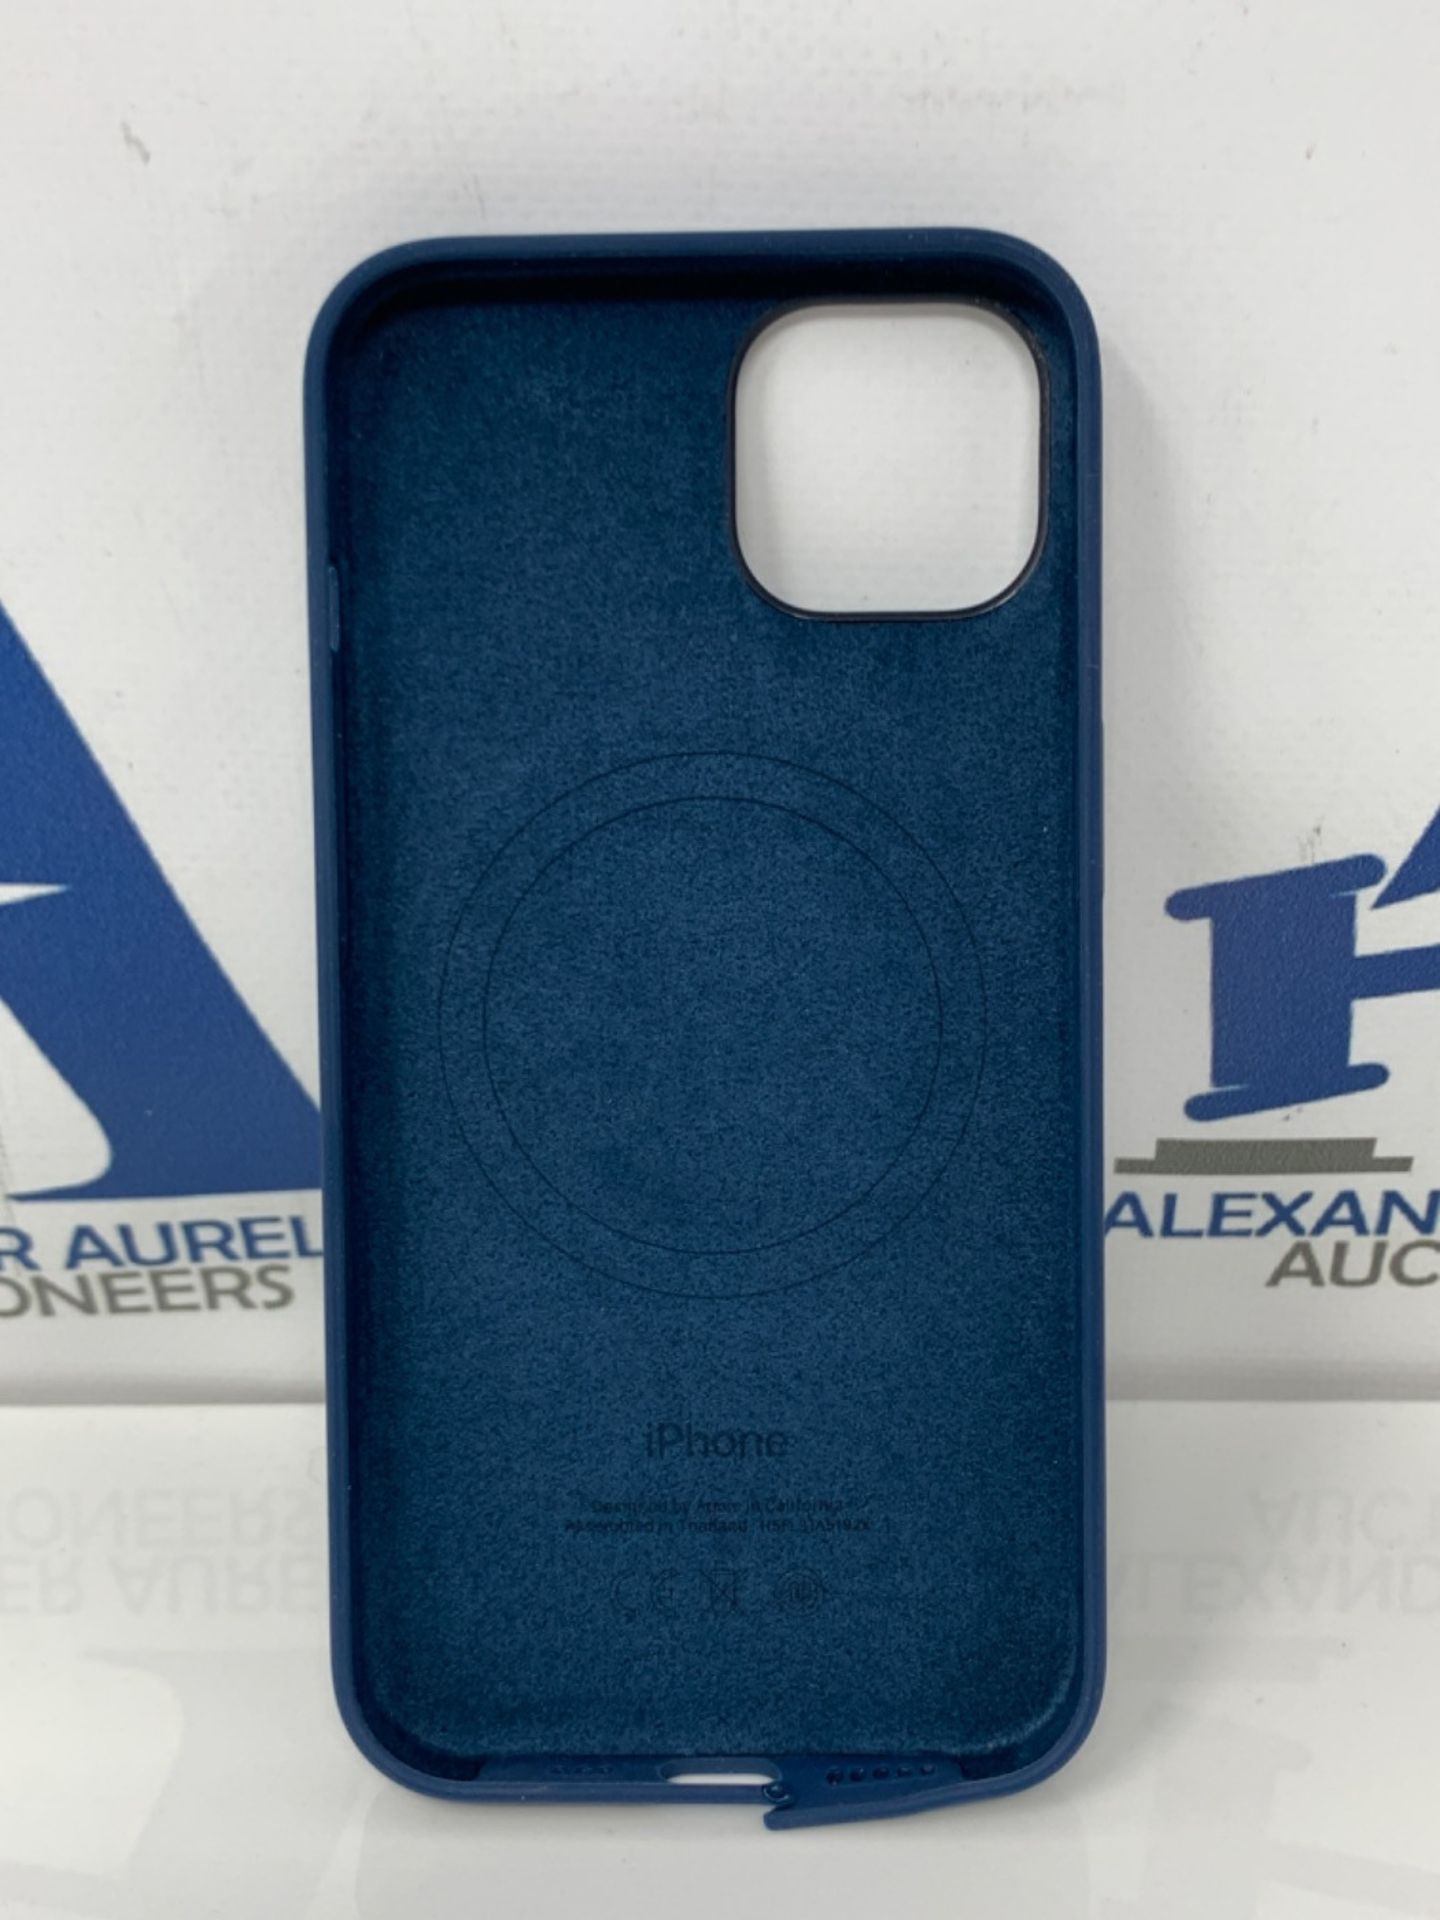 Apple Silicone Case with MagSafe (for iPhone 13) - Abyss Blue